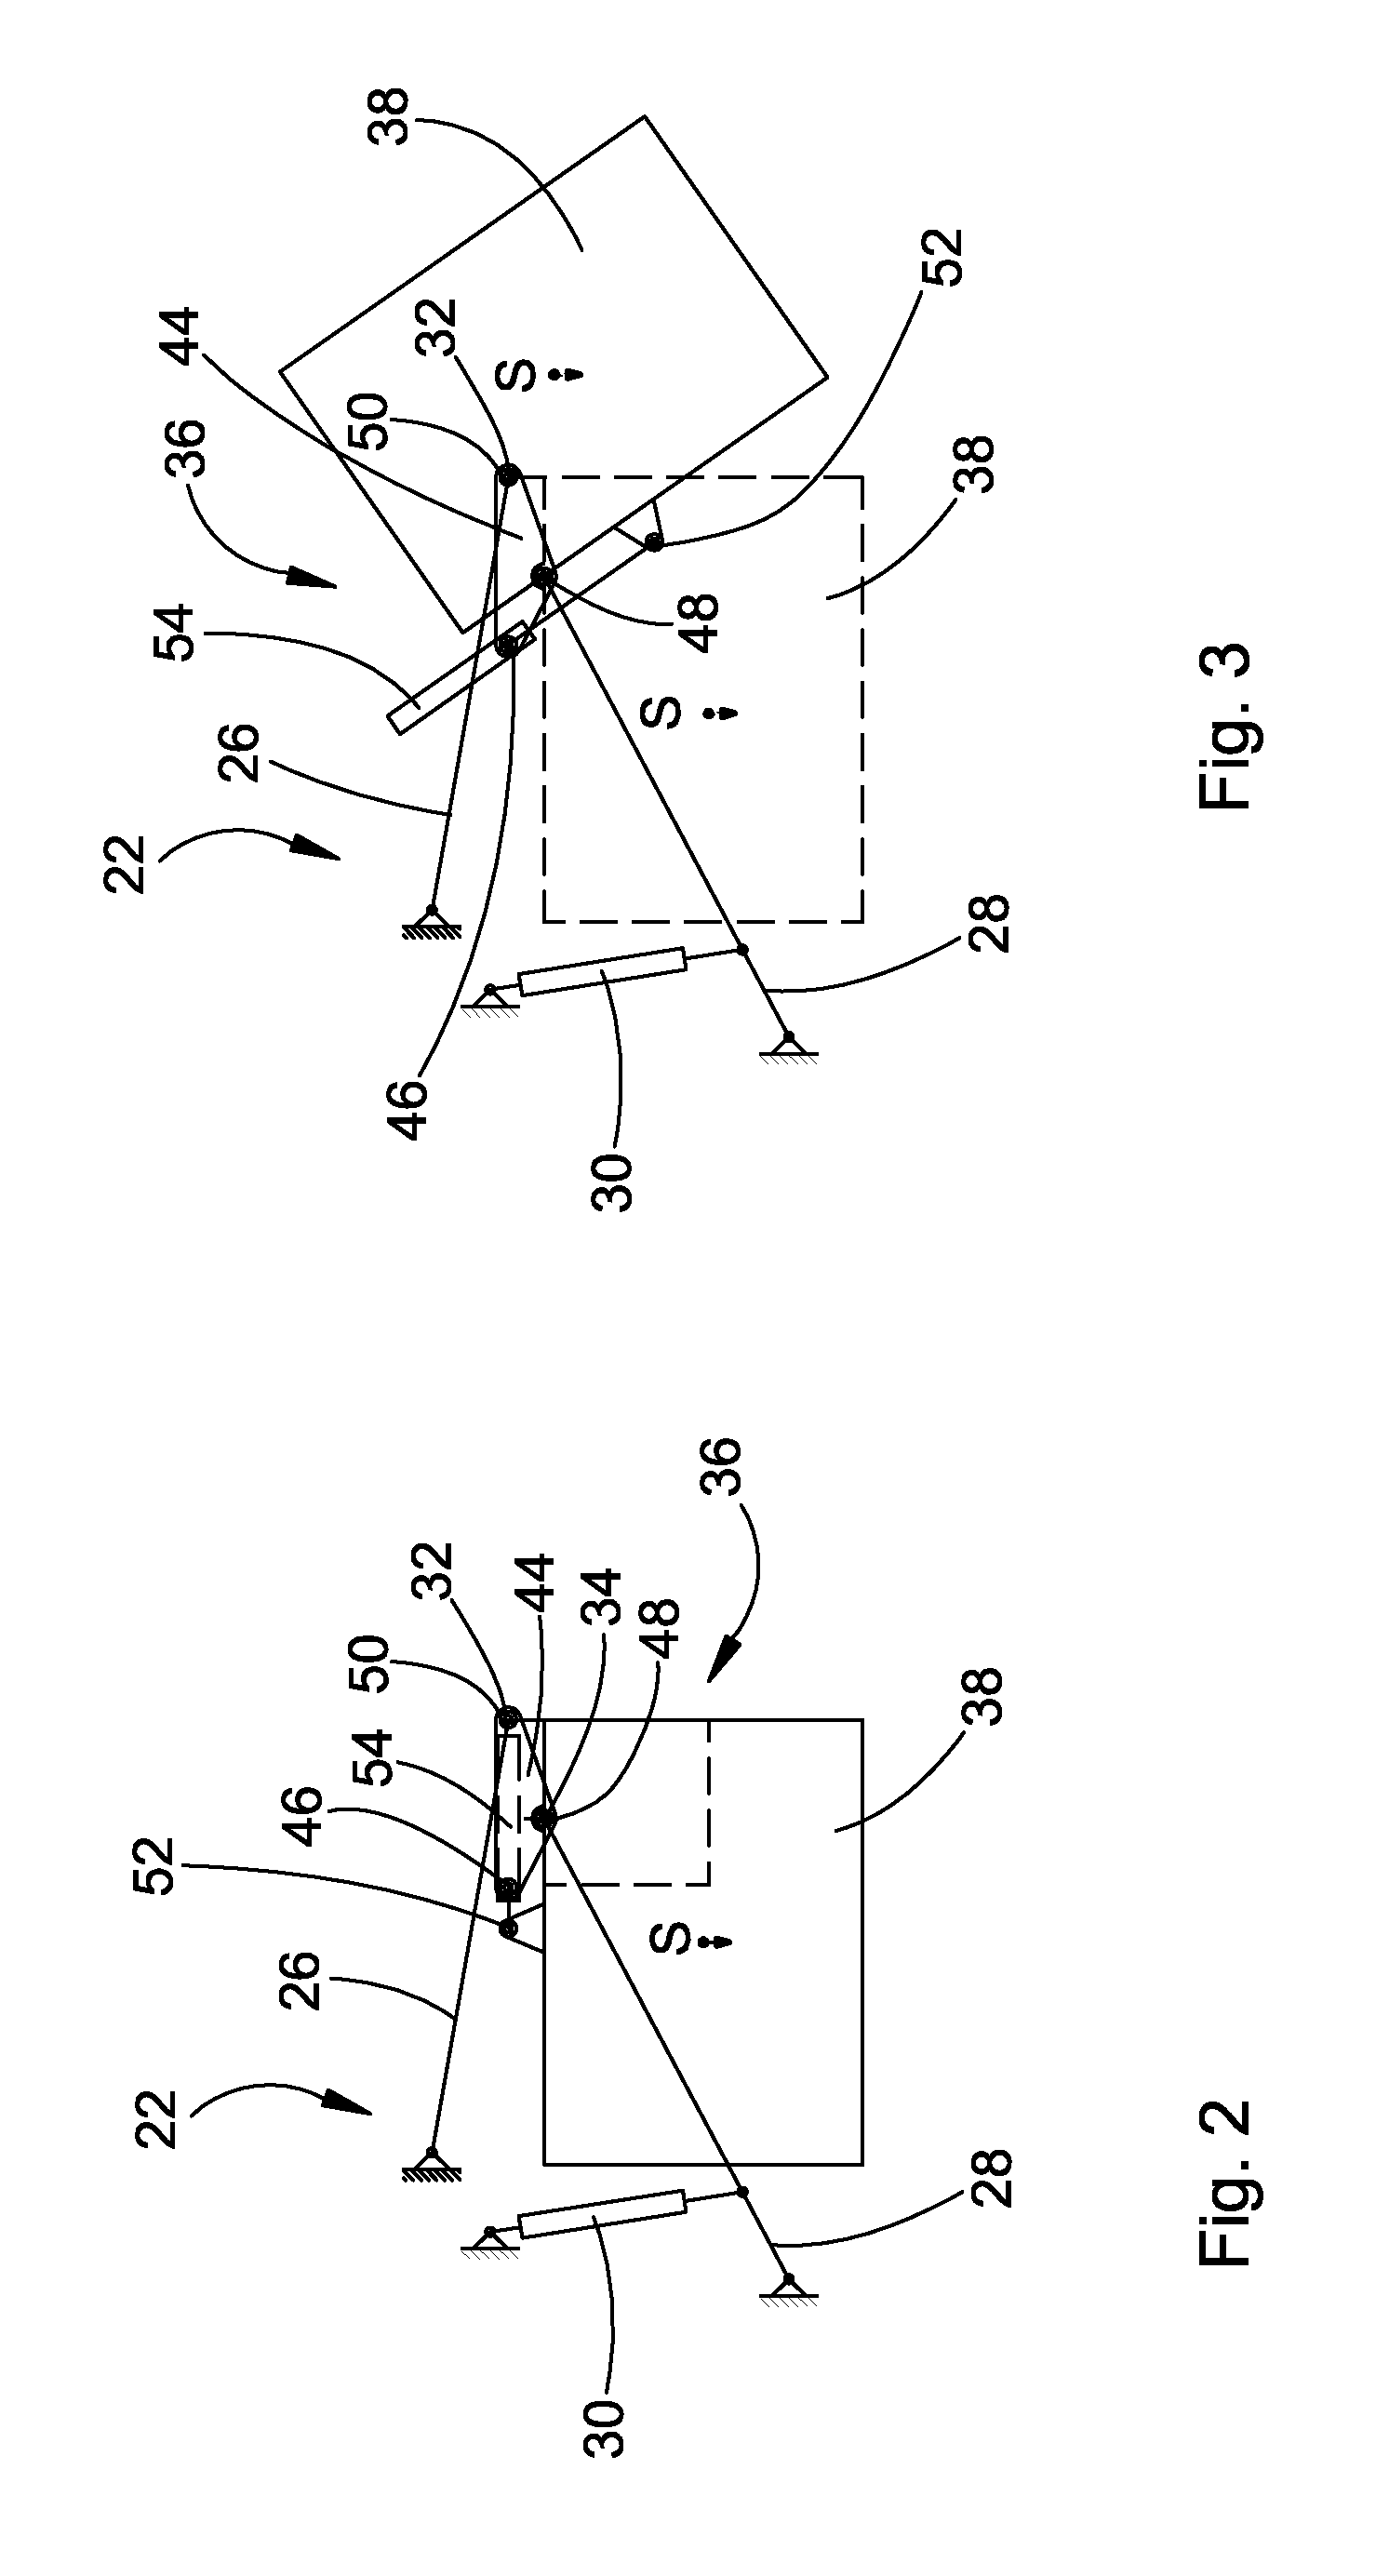 Agricultural vehicle balancing system